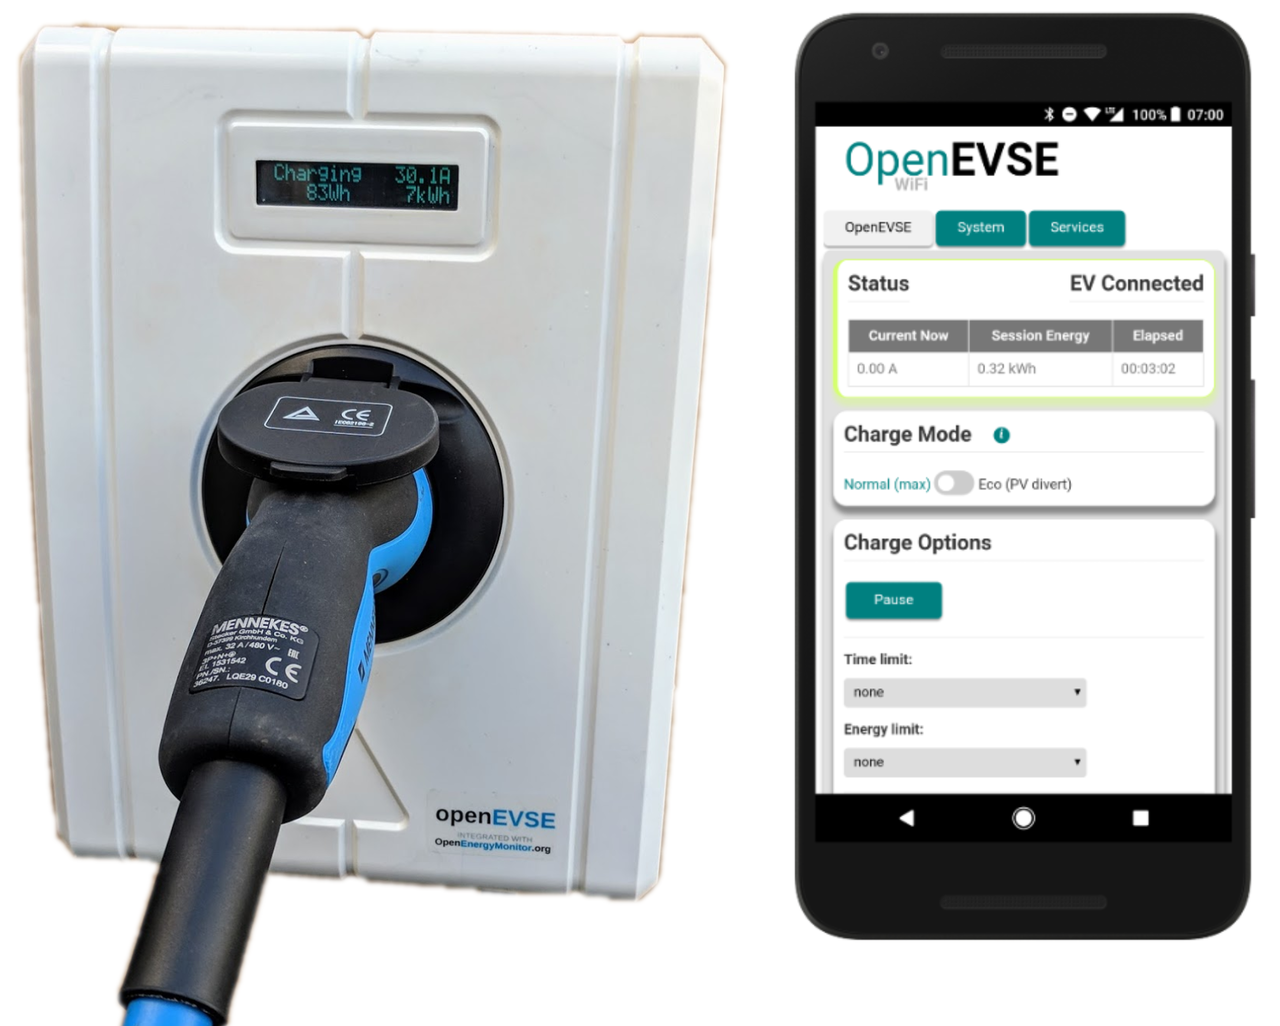 Current now. OPENEVSE. Open EVSE зарядка. Ev Charger support. 32a ev Charger.